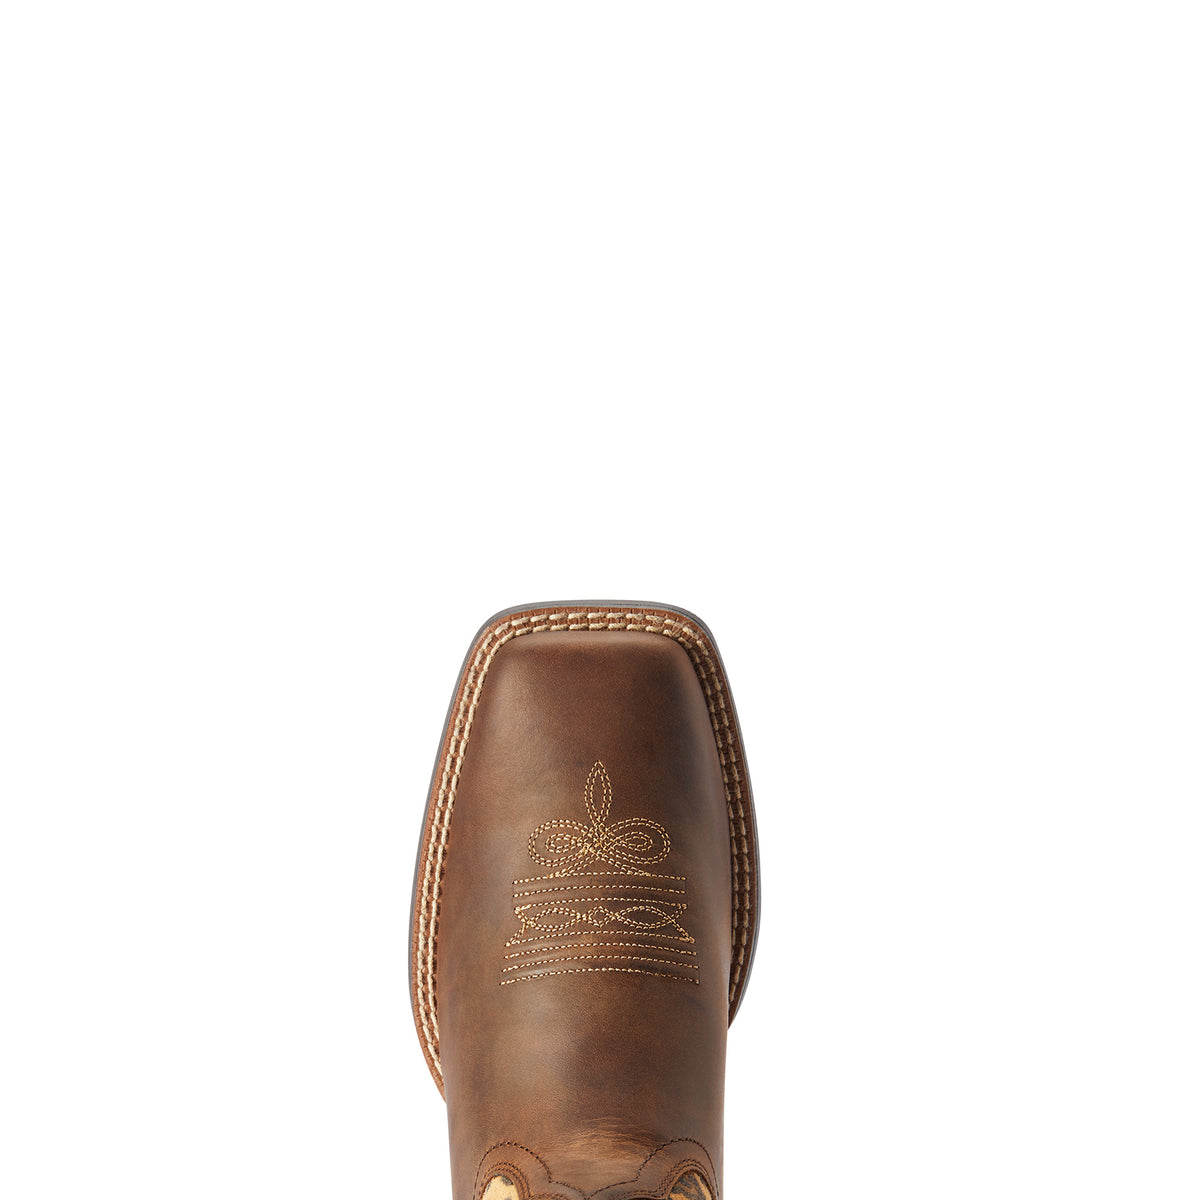 Ariat Womens Round Up Crossroads - Distressed Tan/Sparkle Leopard